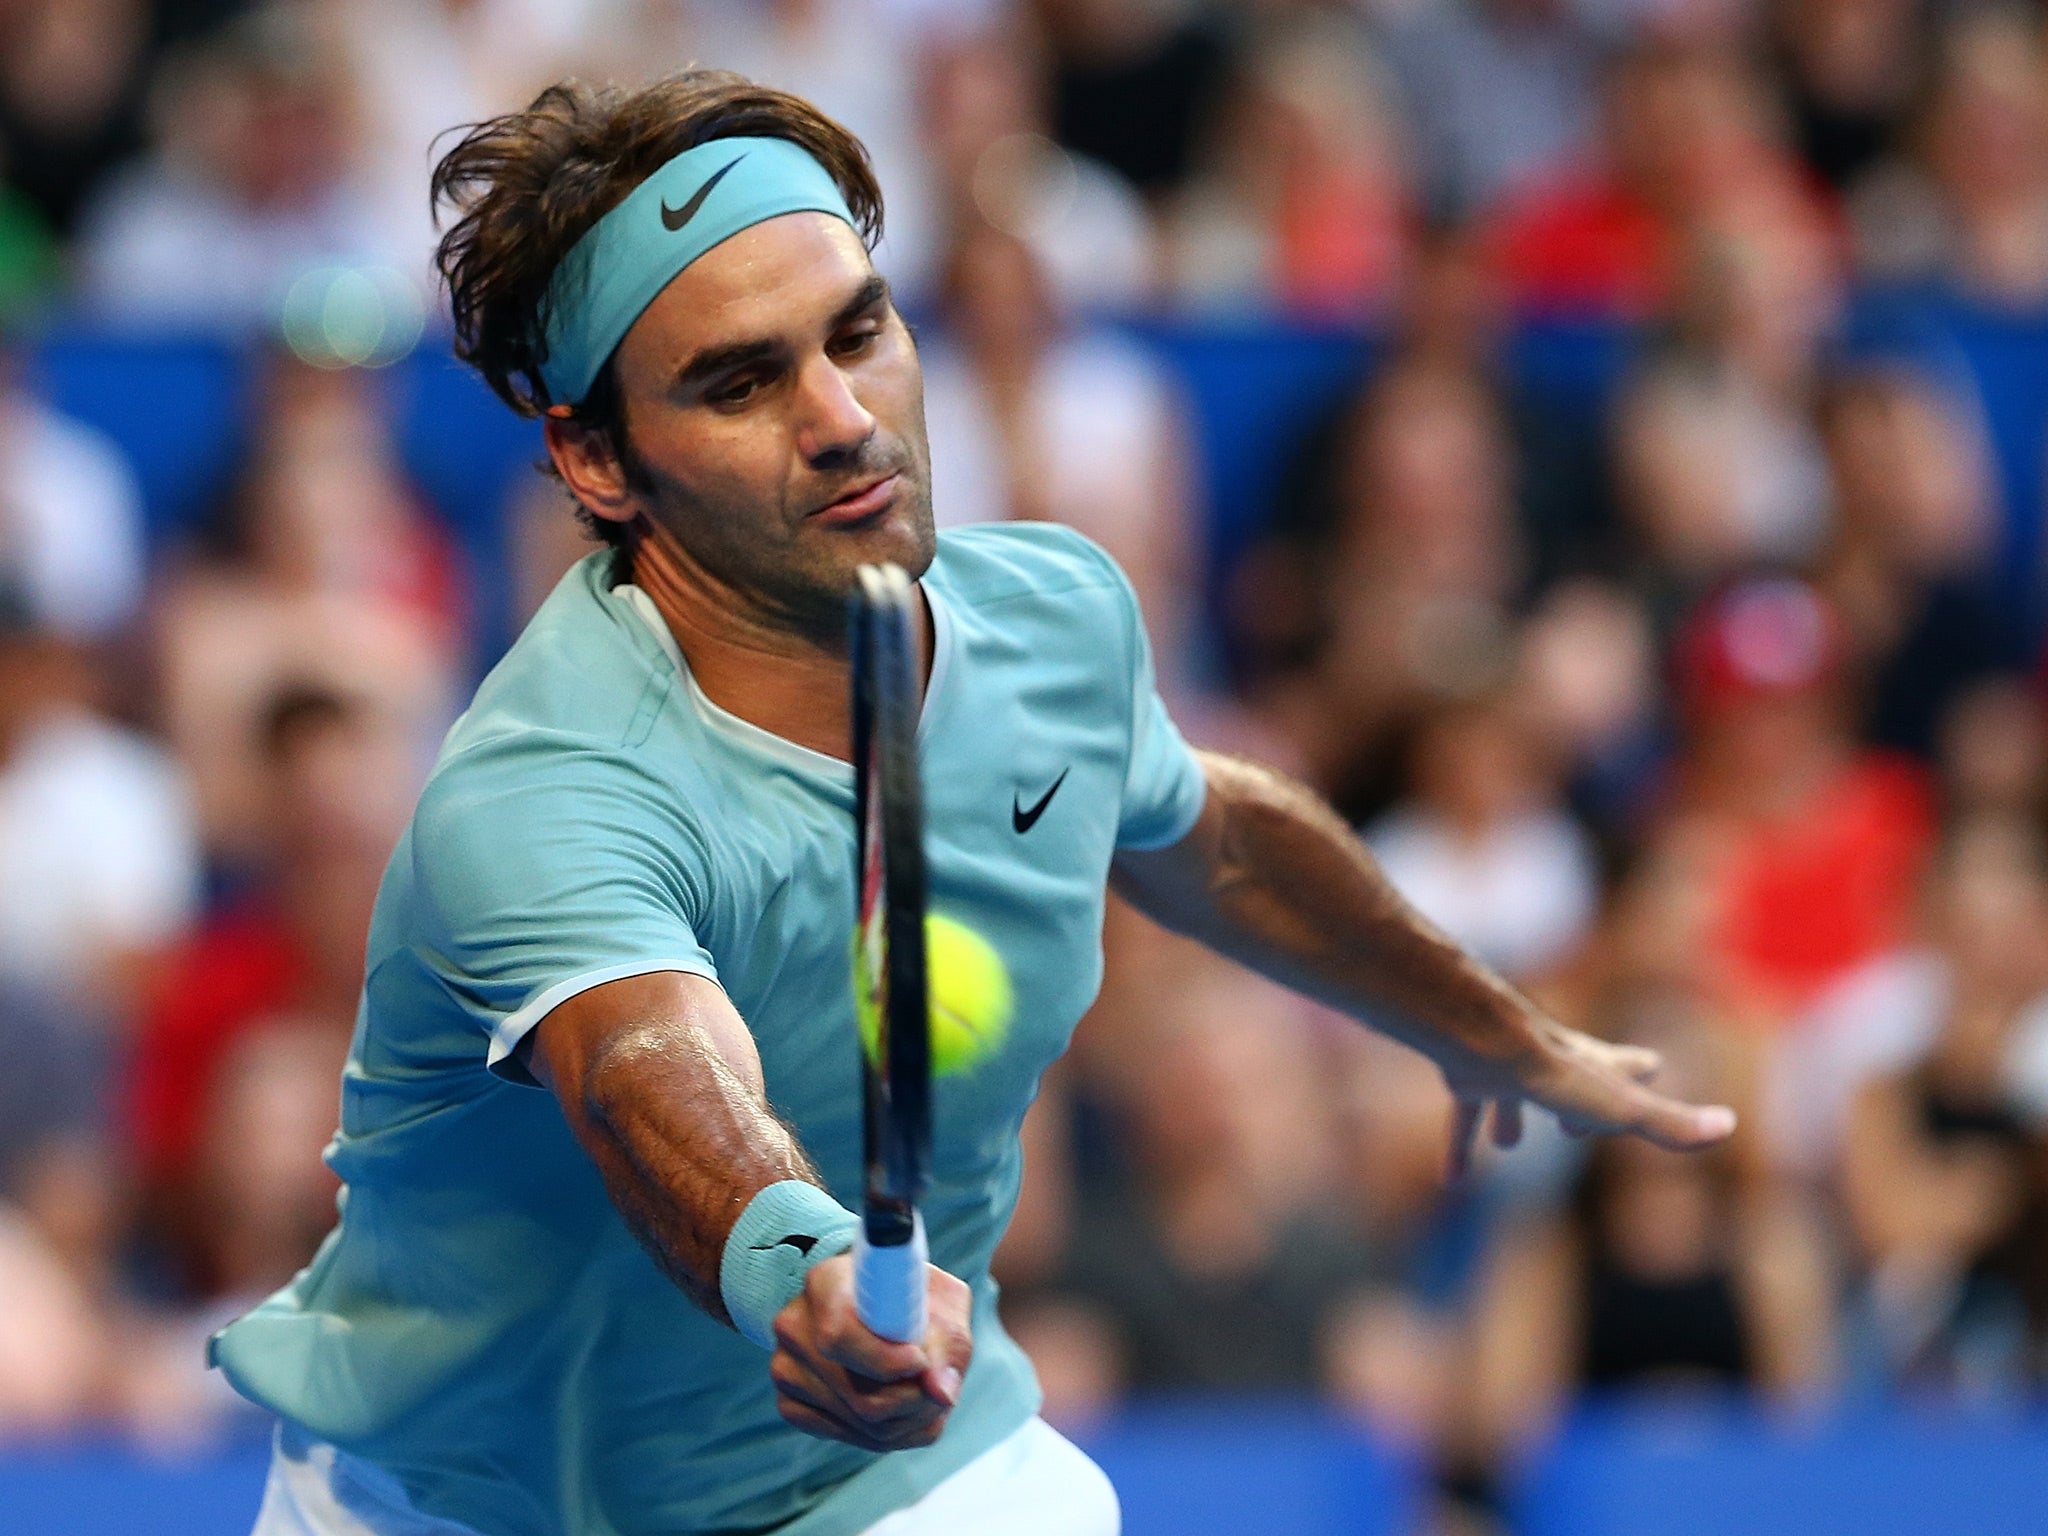 &#13;
Federer has returned to action after a six-month injury lay-off &#13;